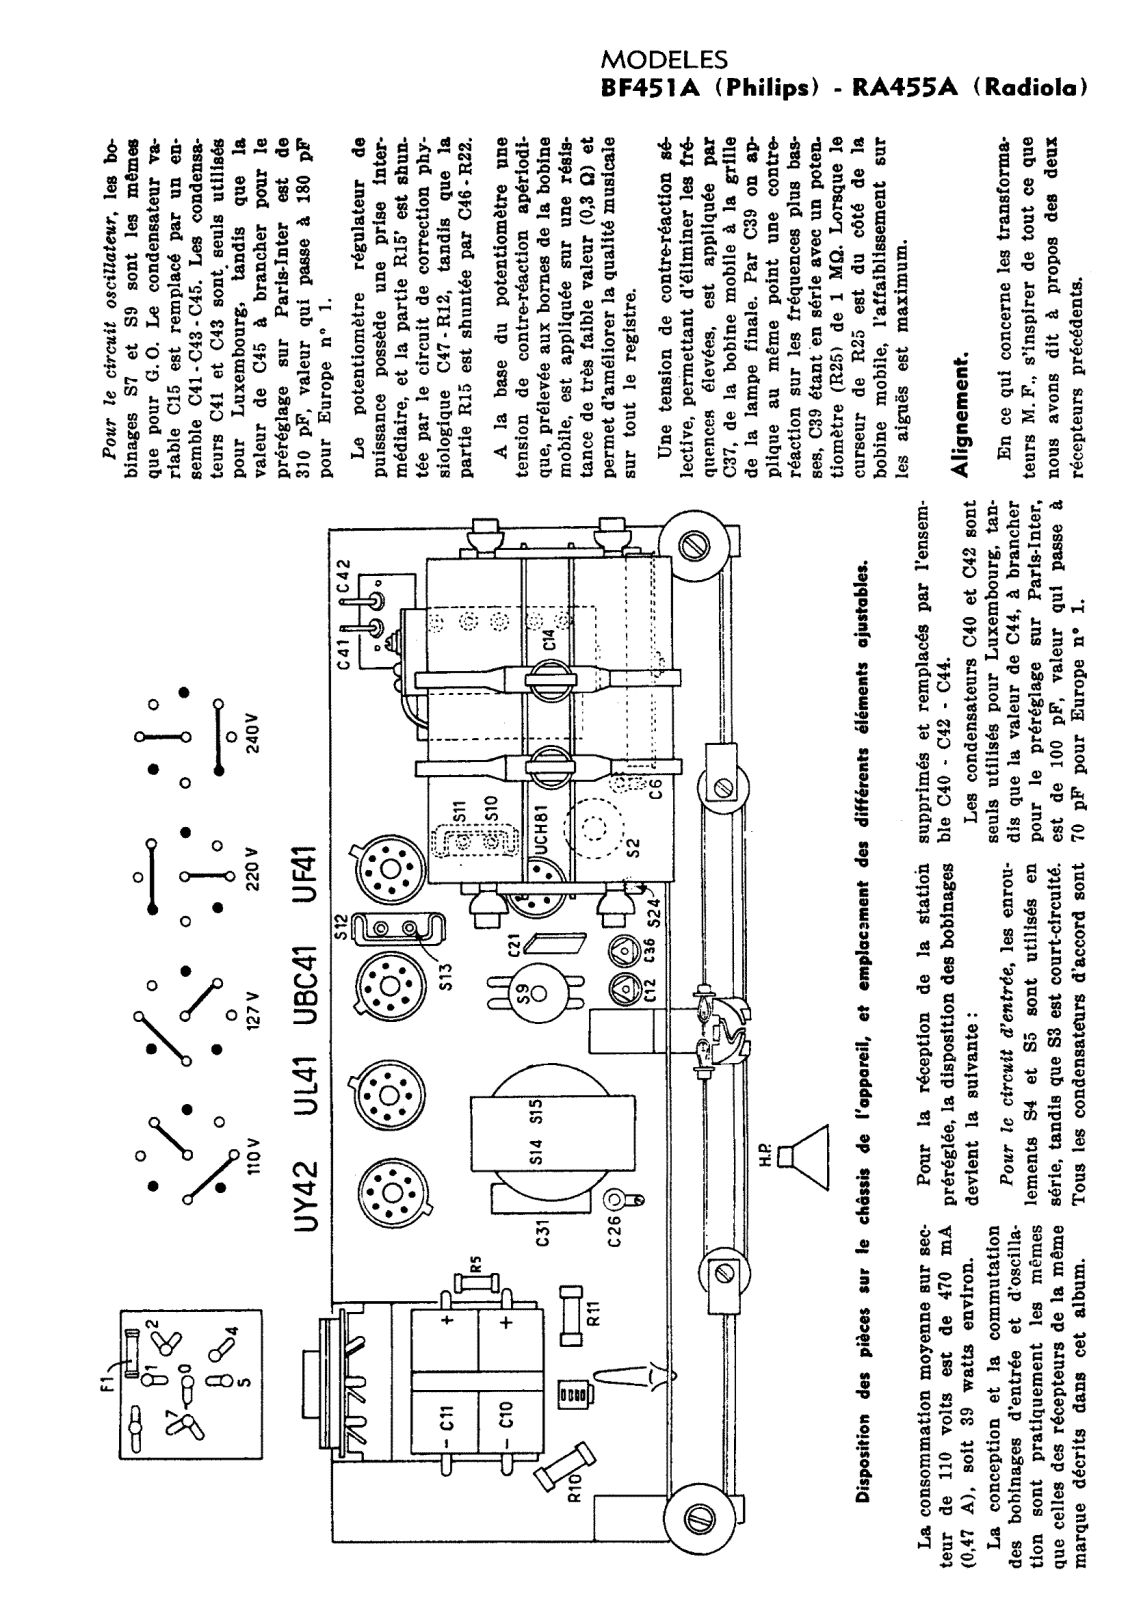 Philips BF-451-A Service Manual